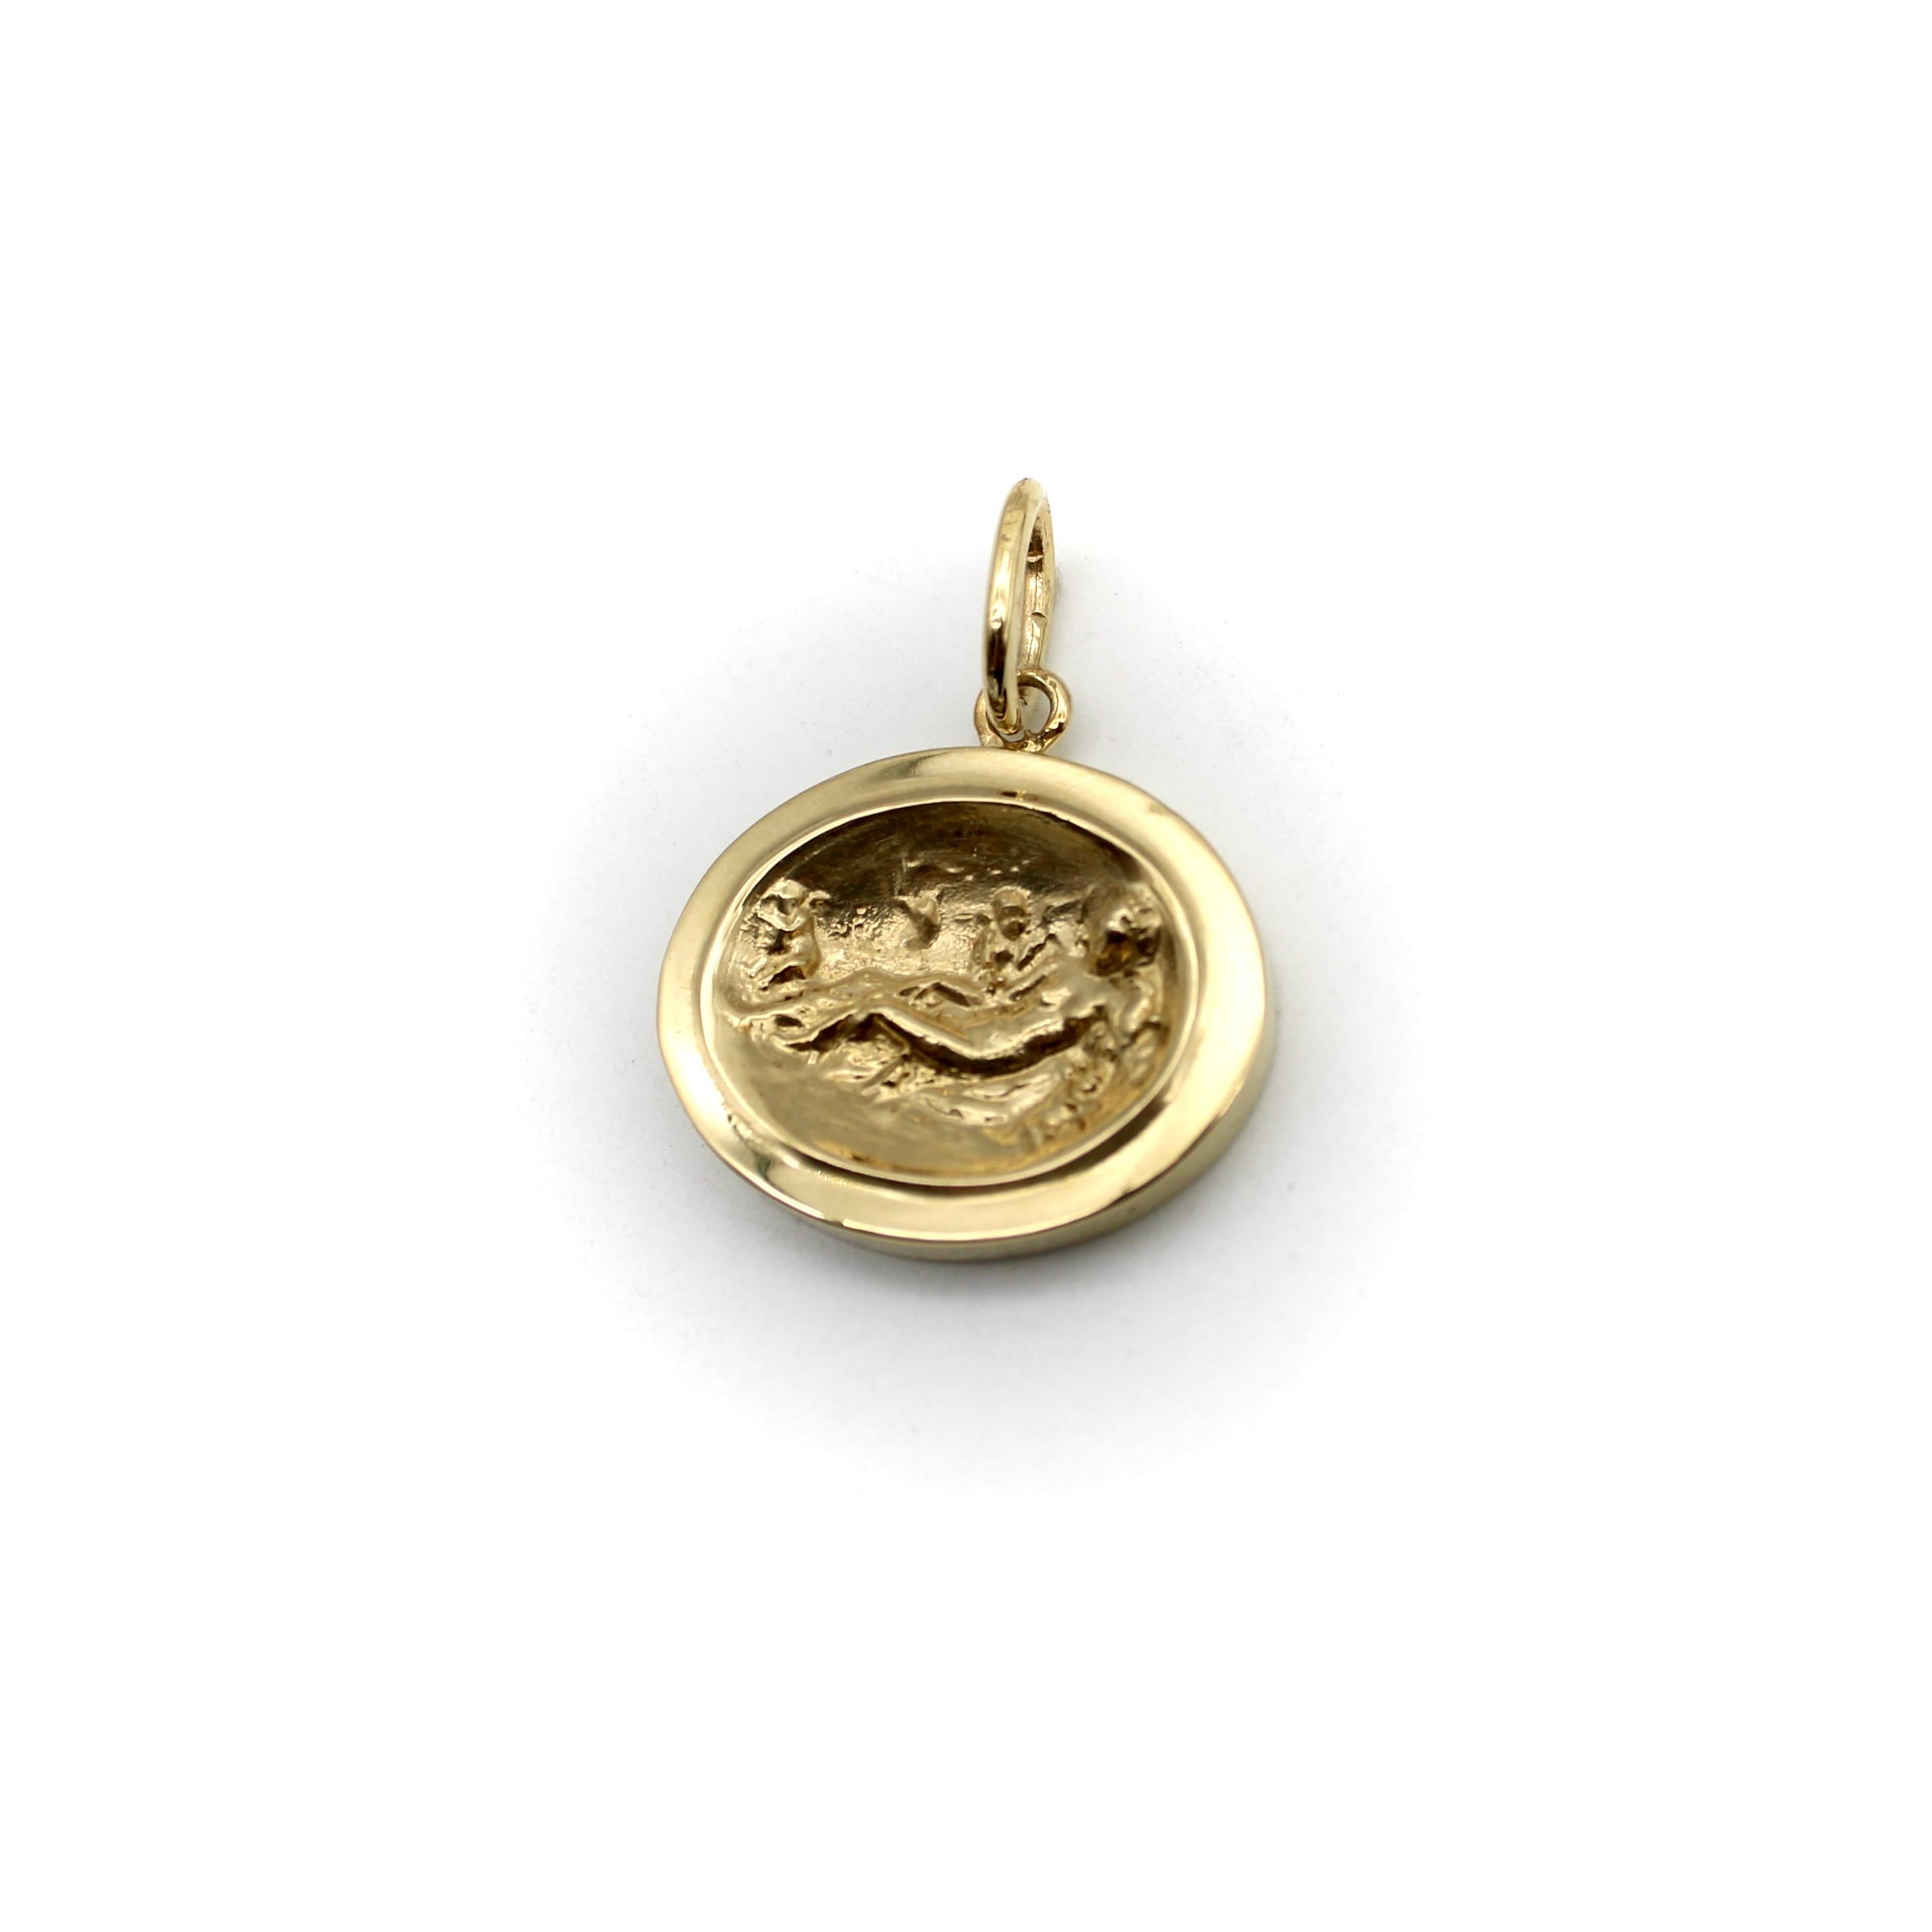 Created as part of our signature collection, this 14k gold intaglio medallion depicts Aphrodite lounging luxuriously, surrounded by winged putti who seem to be attending to her every need. A sensuous tree climbs across the backdrop, suggesting the